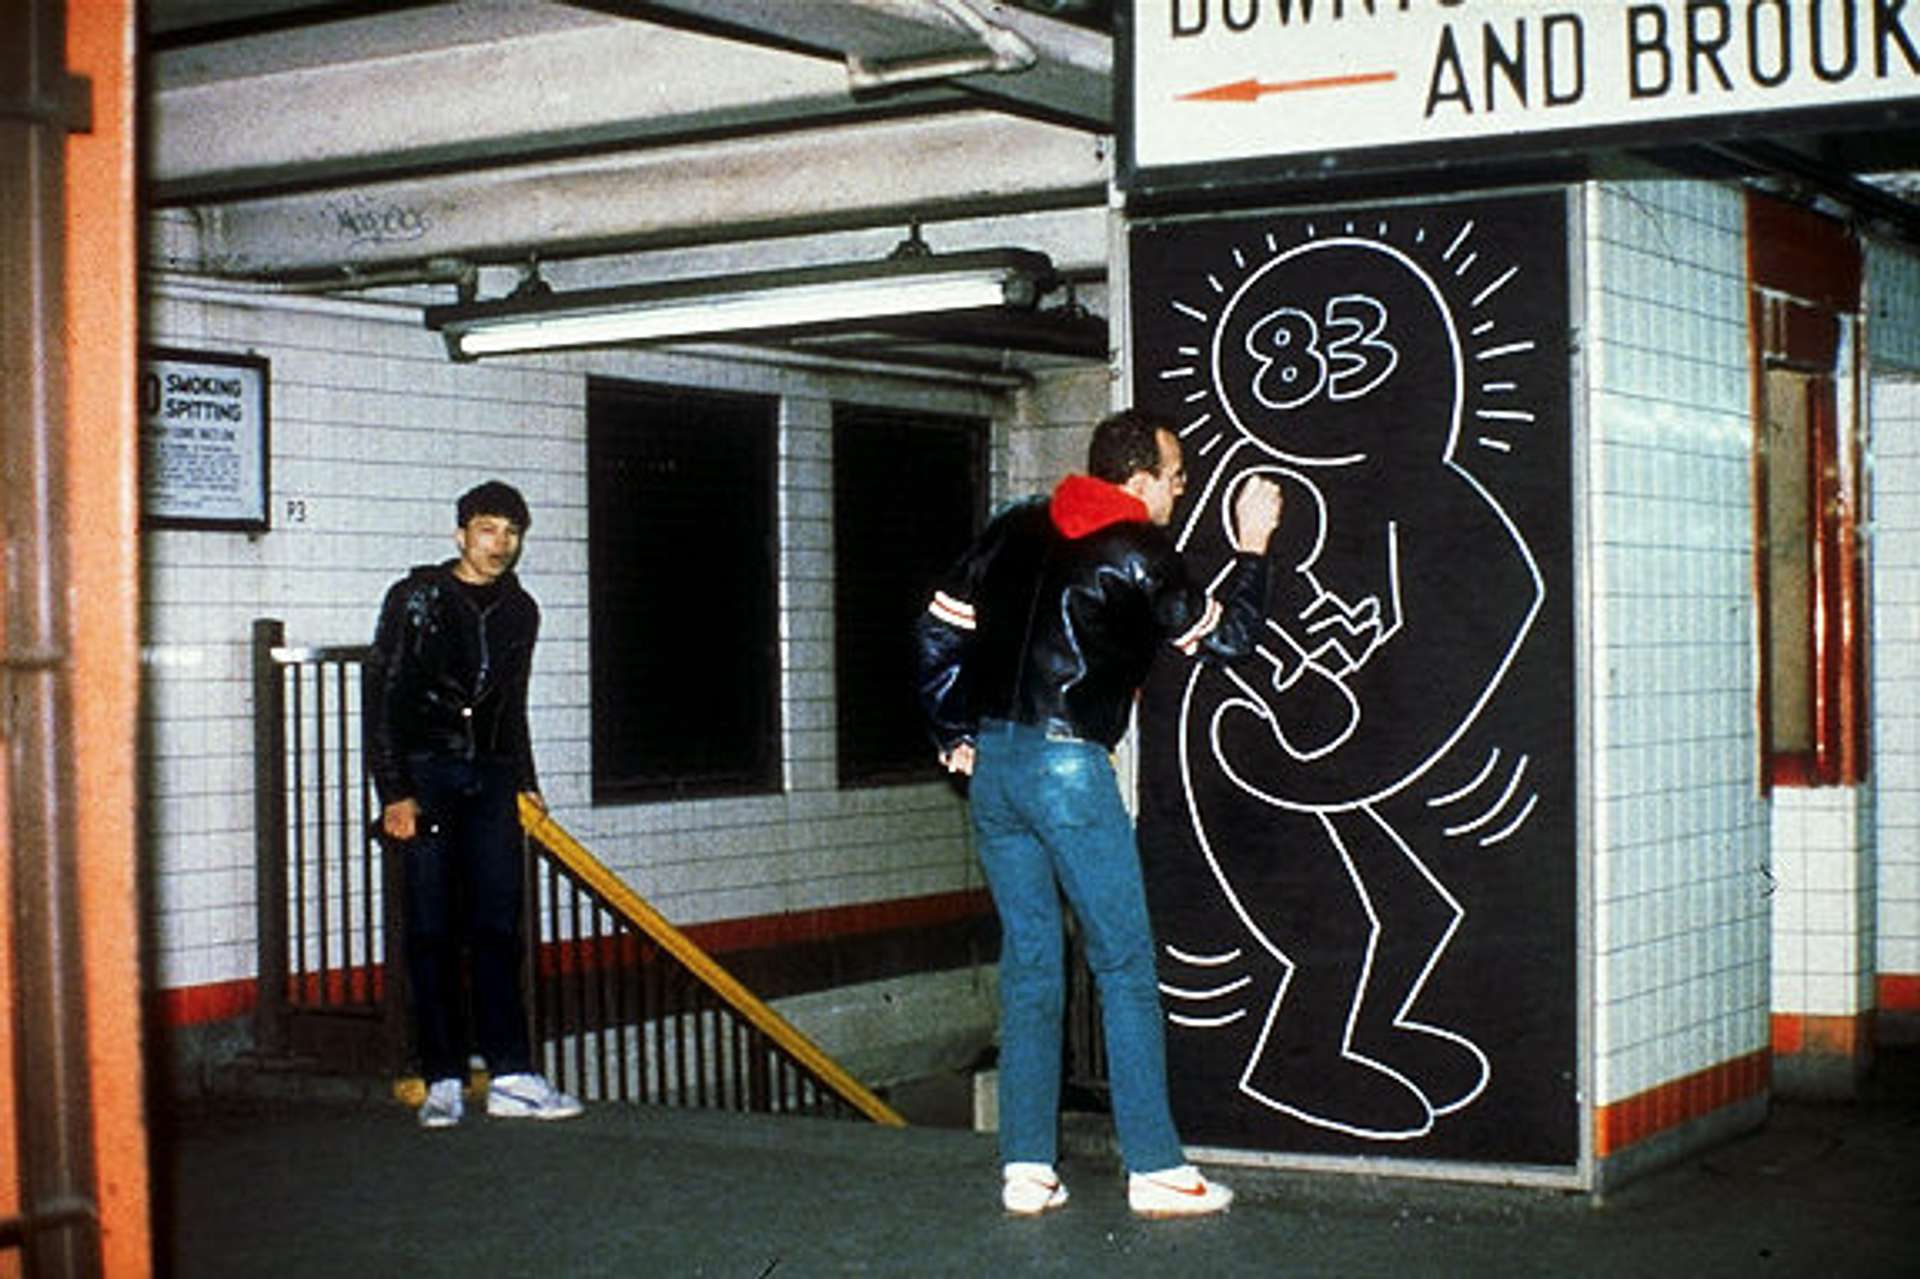 Artist, Keith Haring, in the New York Subway graffiti-ing onto a wall